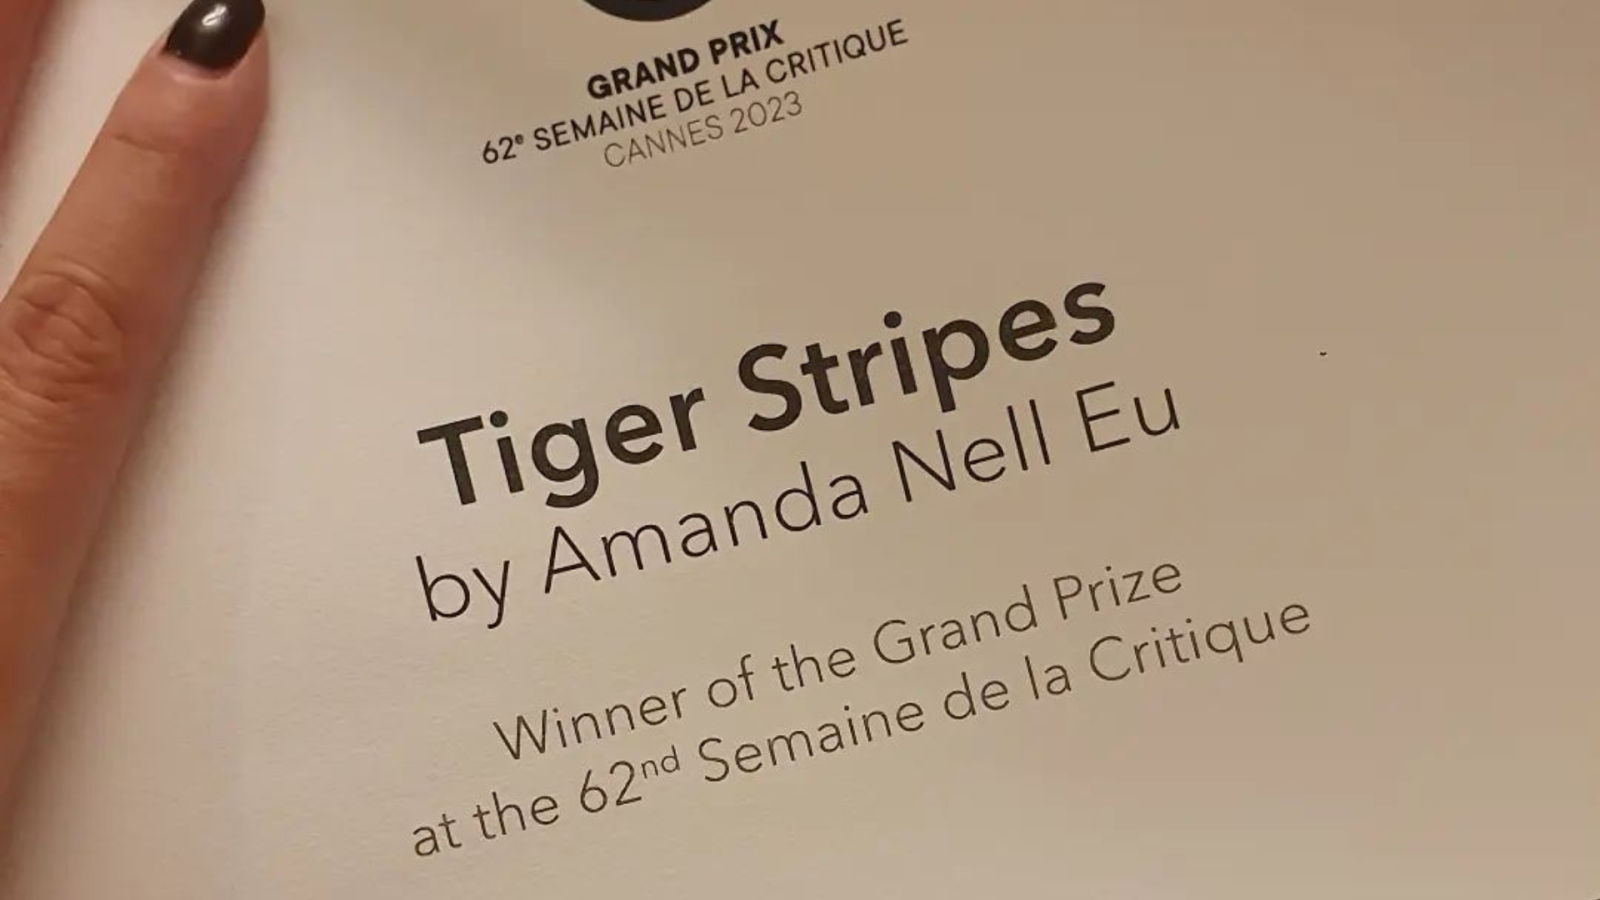 Tiger Stripes is the first Malaysian film to nab top award at Cannes  Critics Week